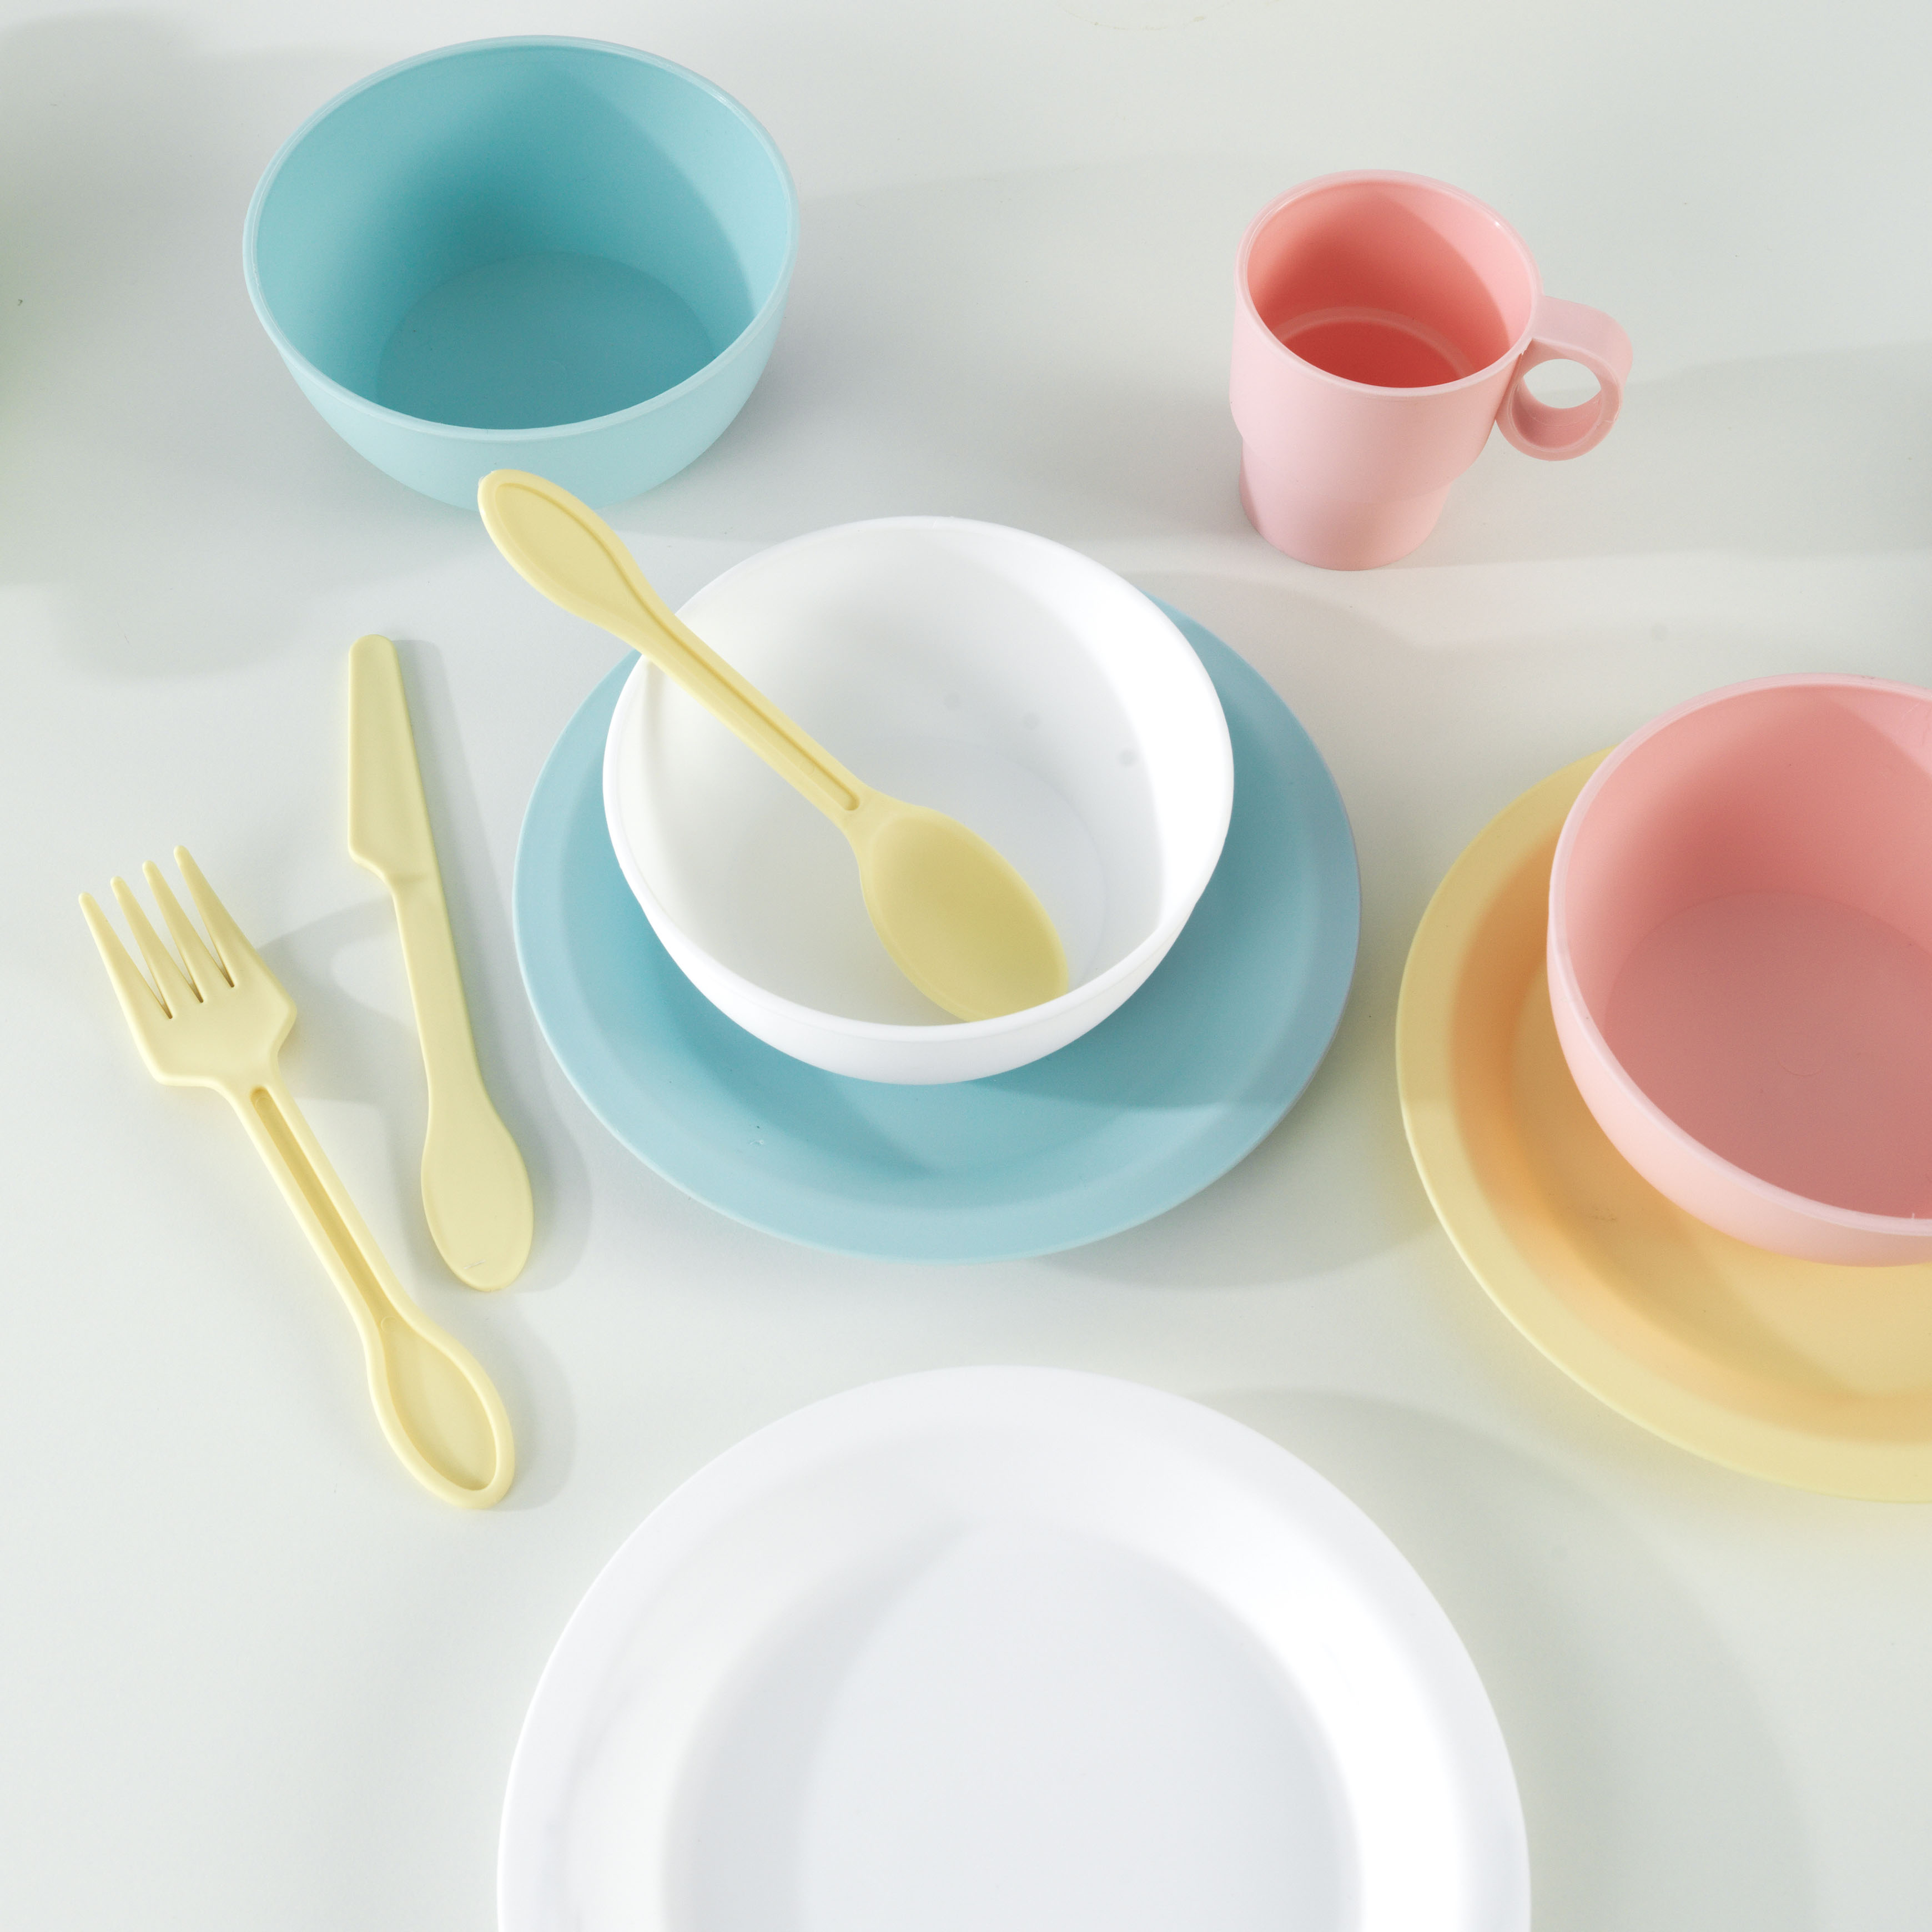 KidKraft 27-Piece Pastel Cookware Set, Plastic Dishes & Utensils for Play Kitchens - image 2 of 5